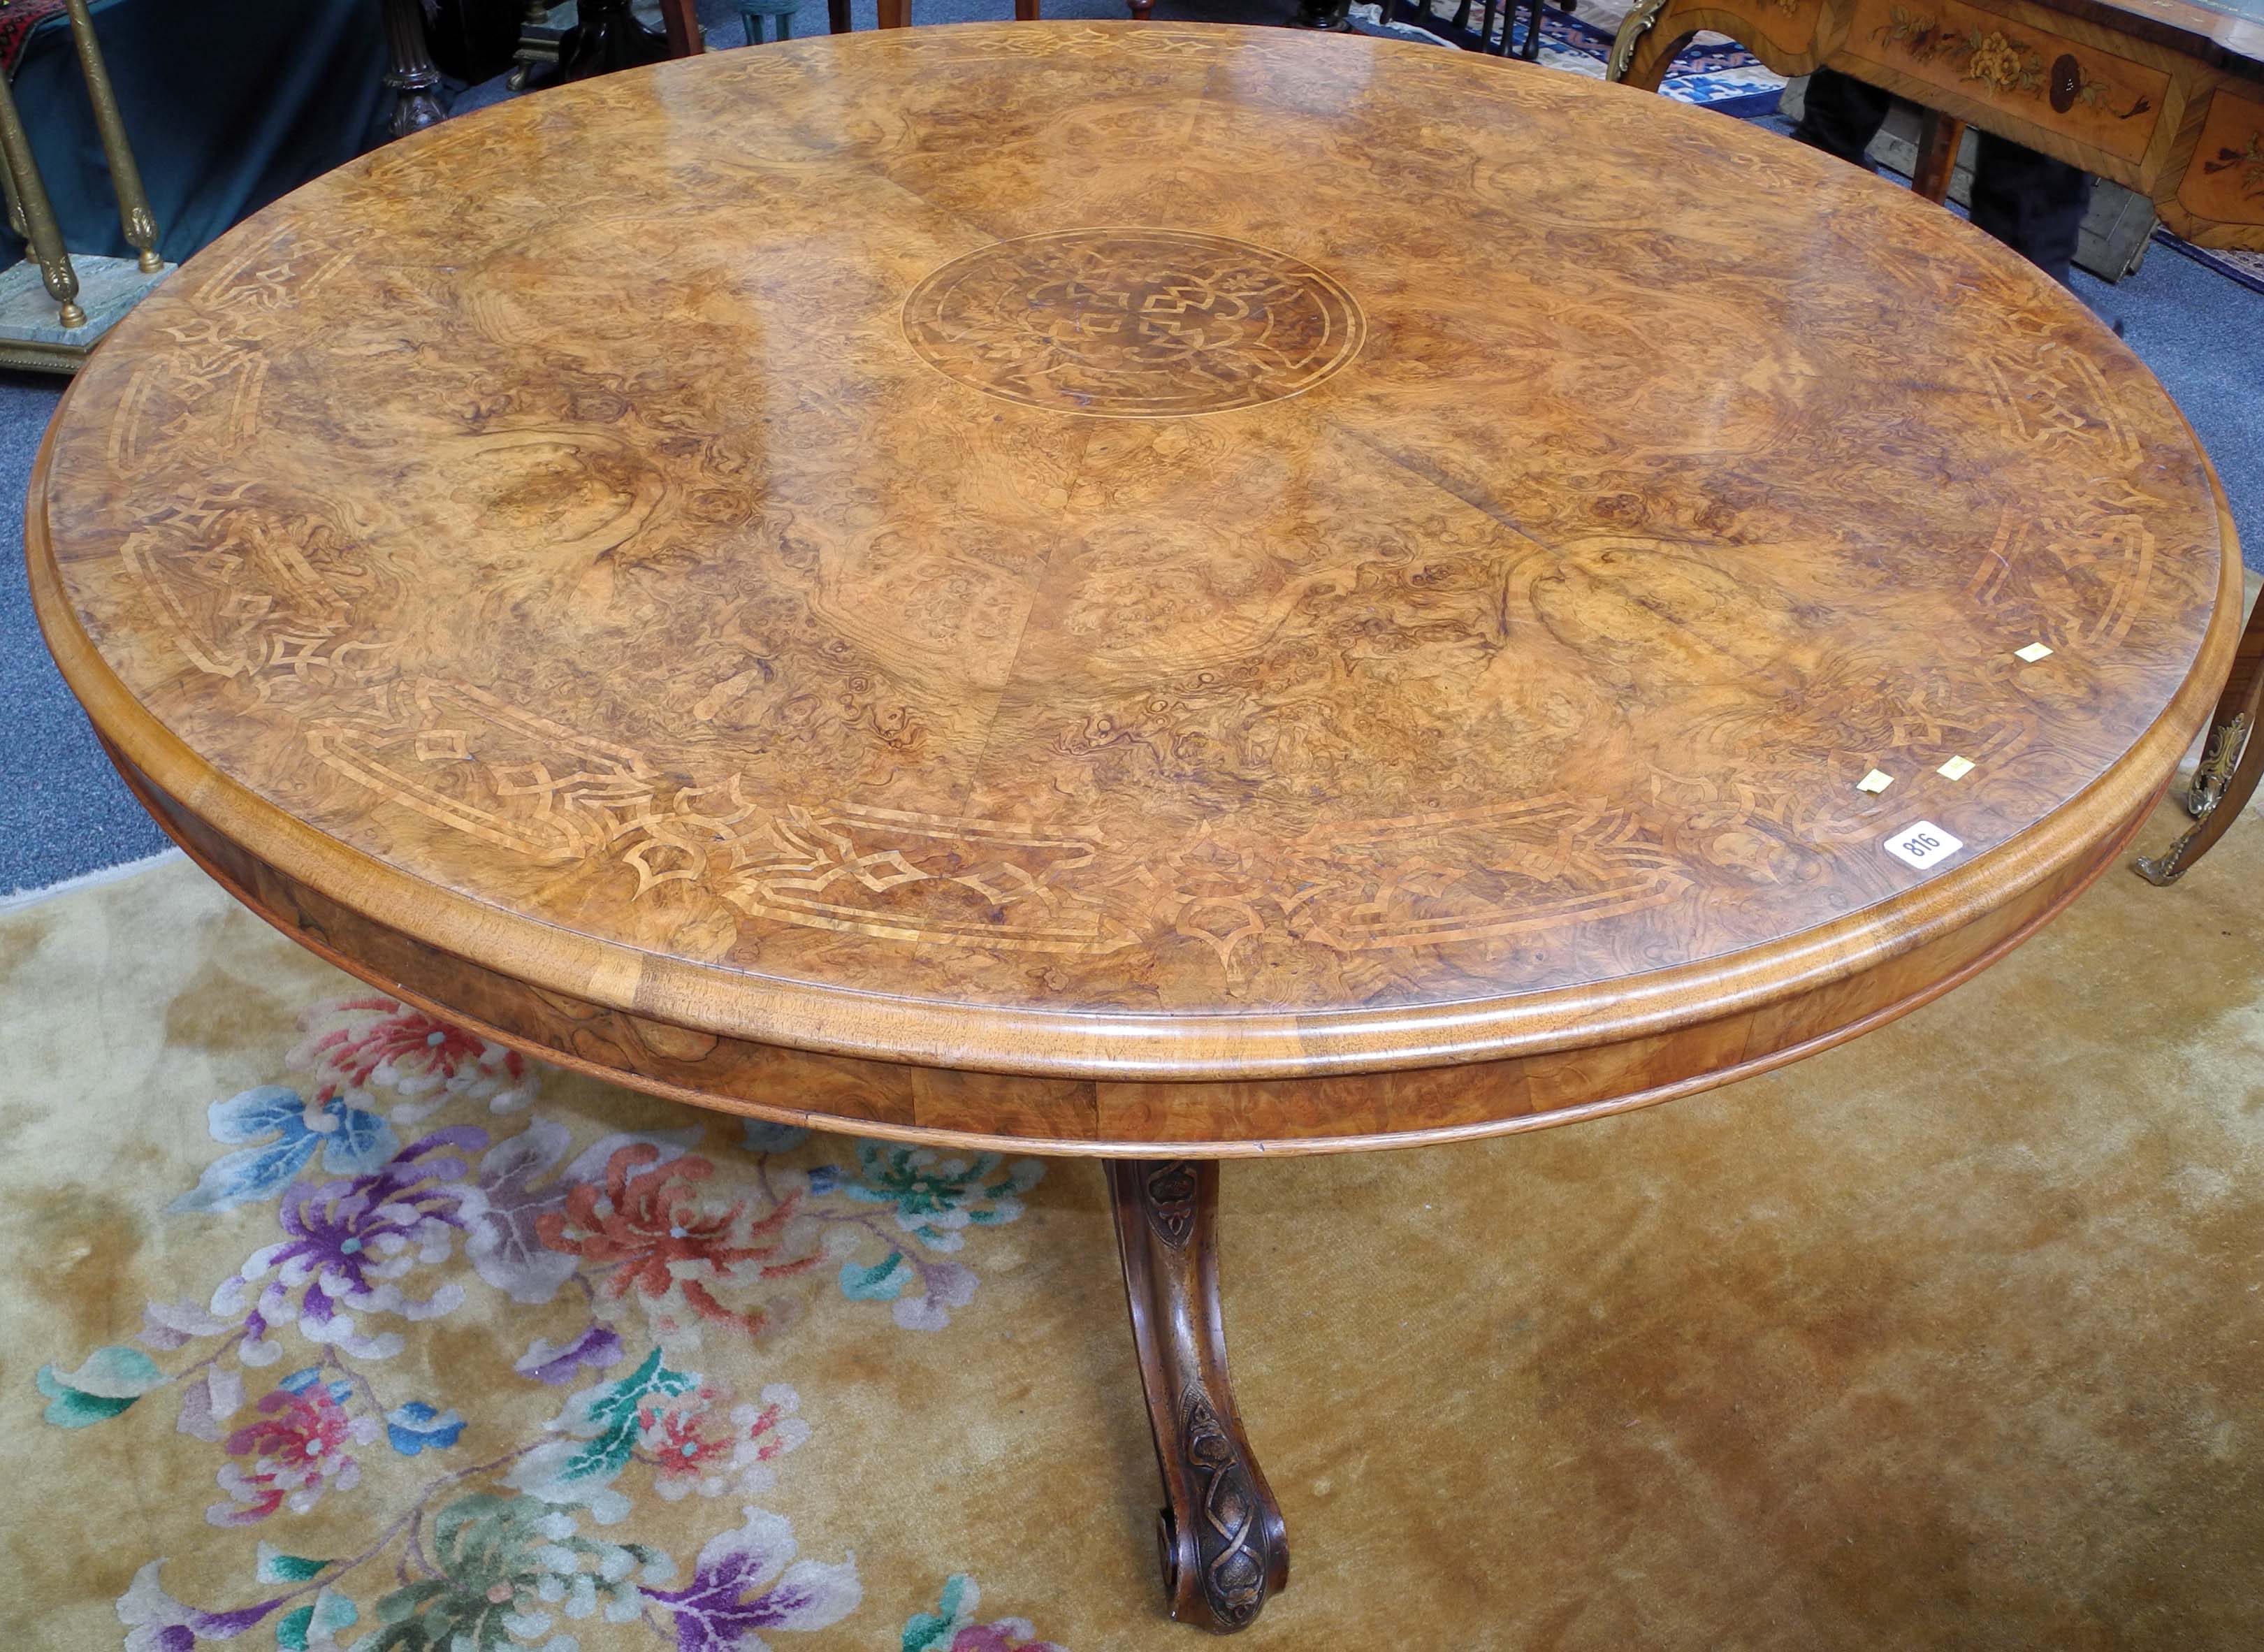 A Victorian burr walnut and marquetry inlaid circular breakfast table, raised on a melon section